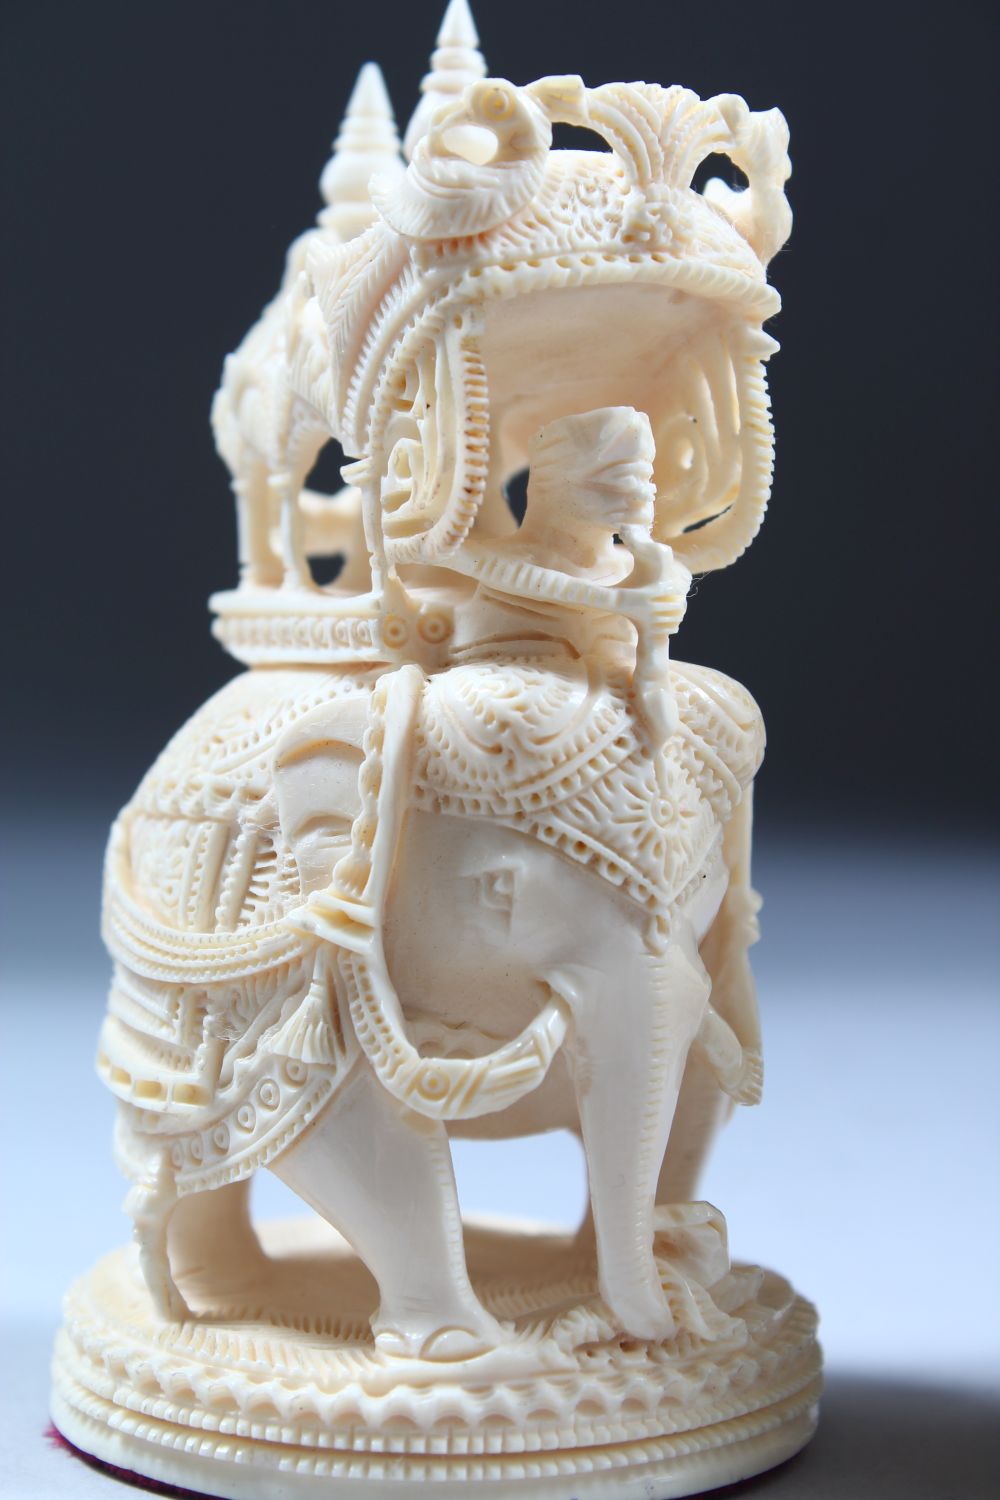 A GOOD 19TH / 20TH CENTURY INDIAN CARVED IVORY CHESS SET IN ORIGINAL BOX, from 10cm high down to 2. - Image 6 of 12